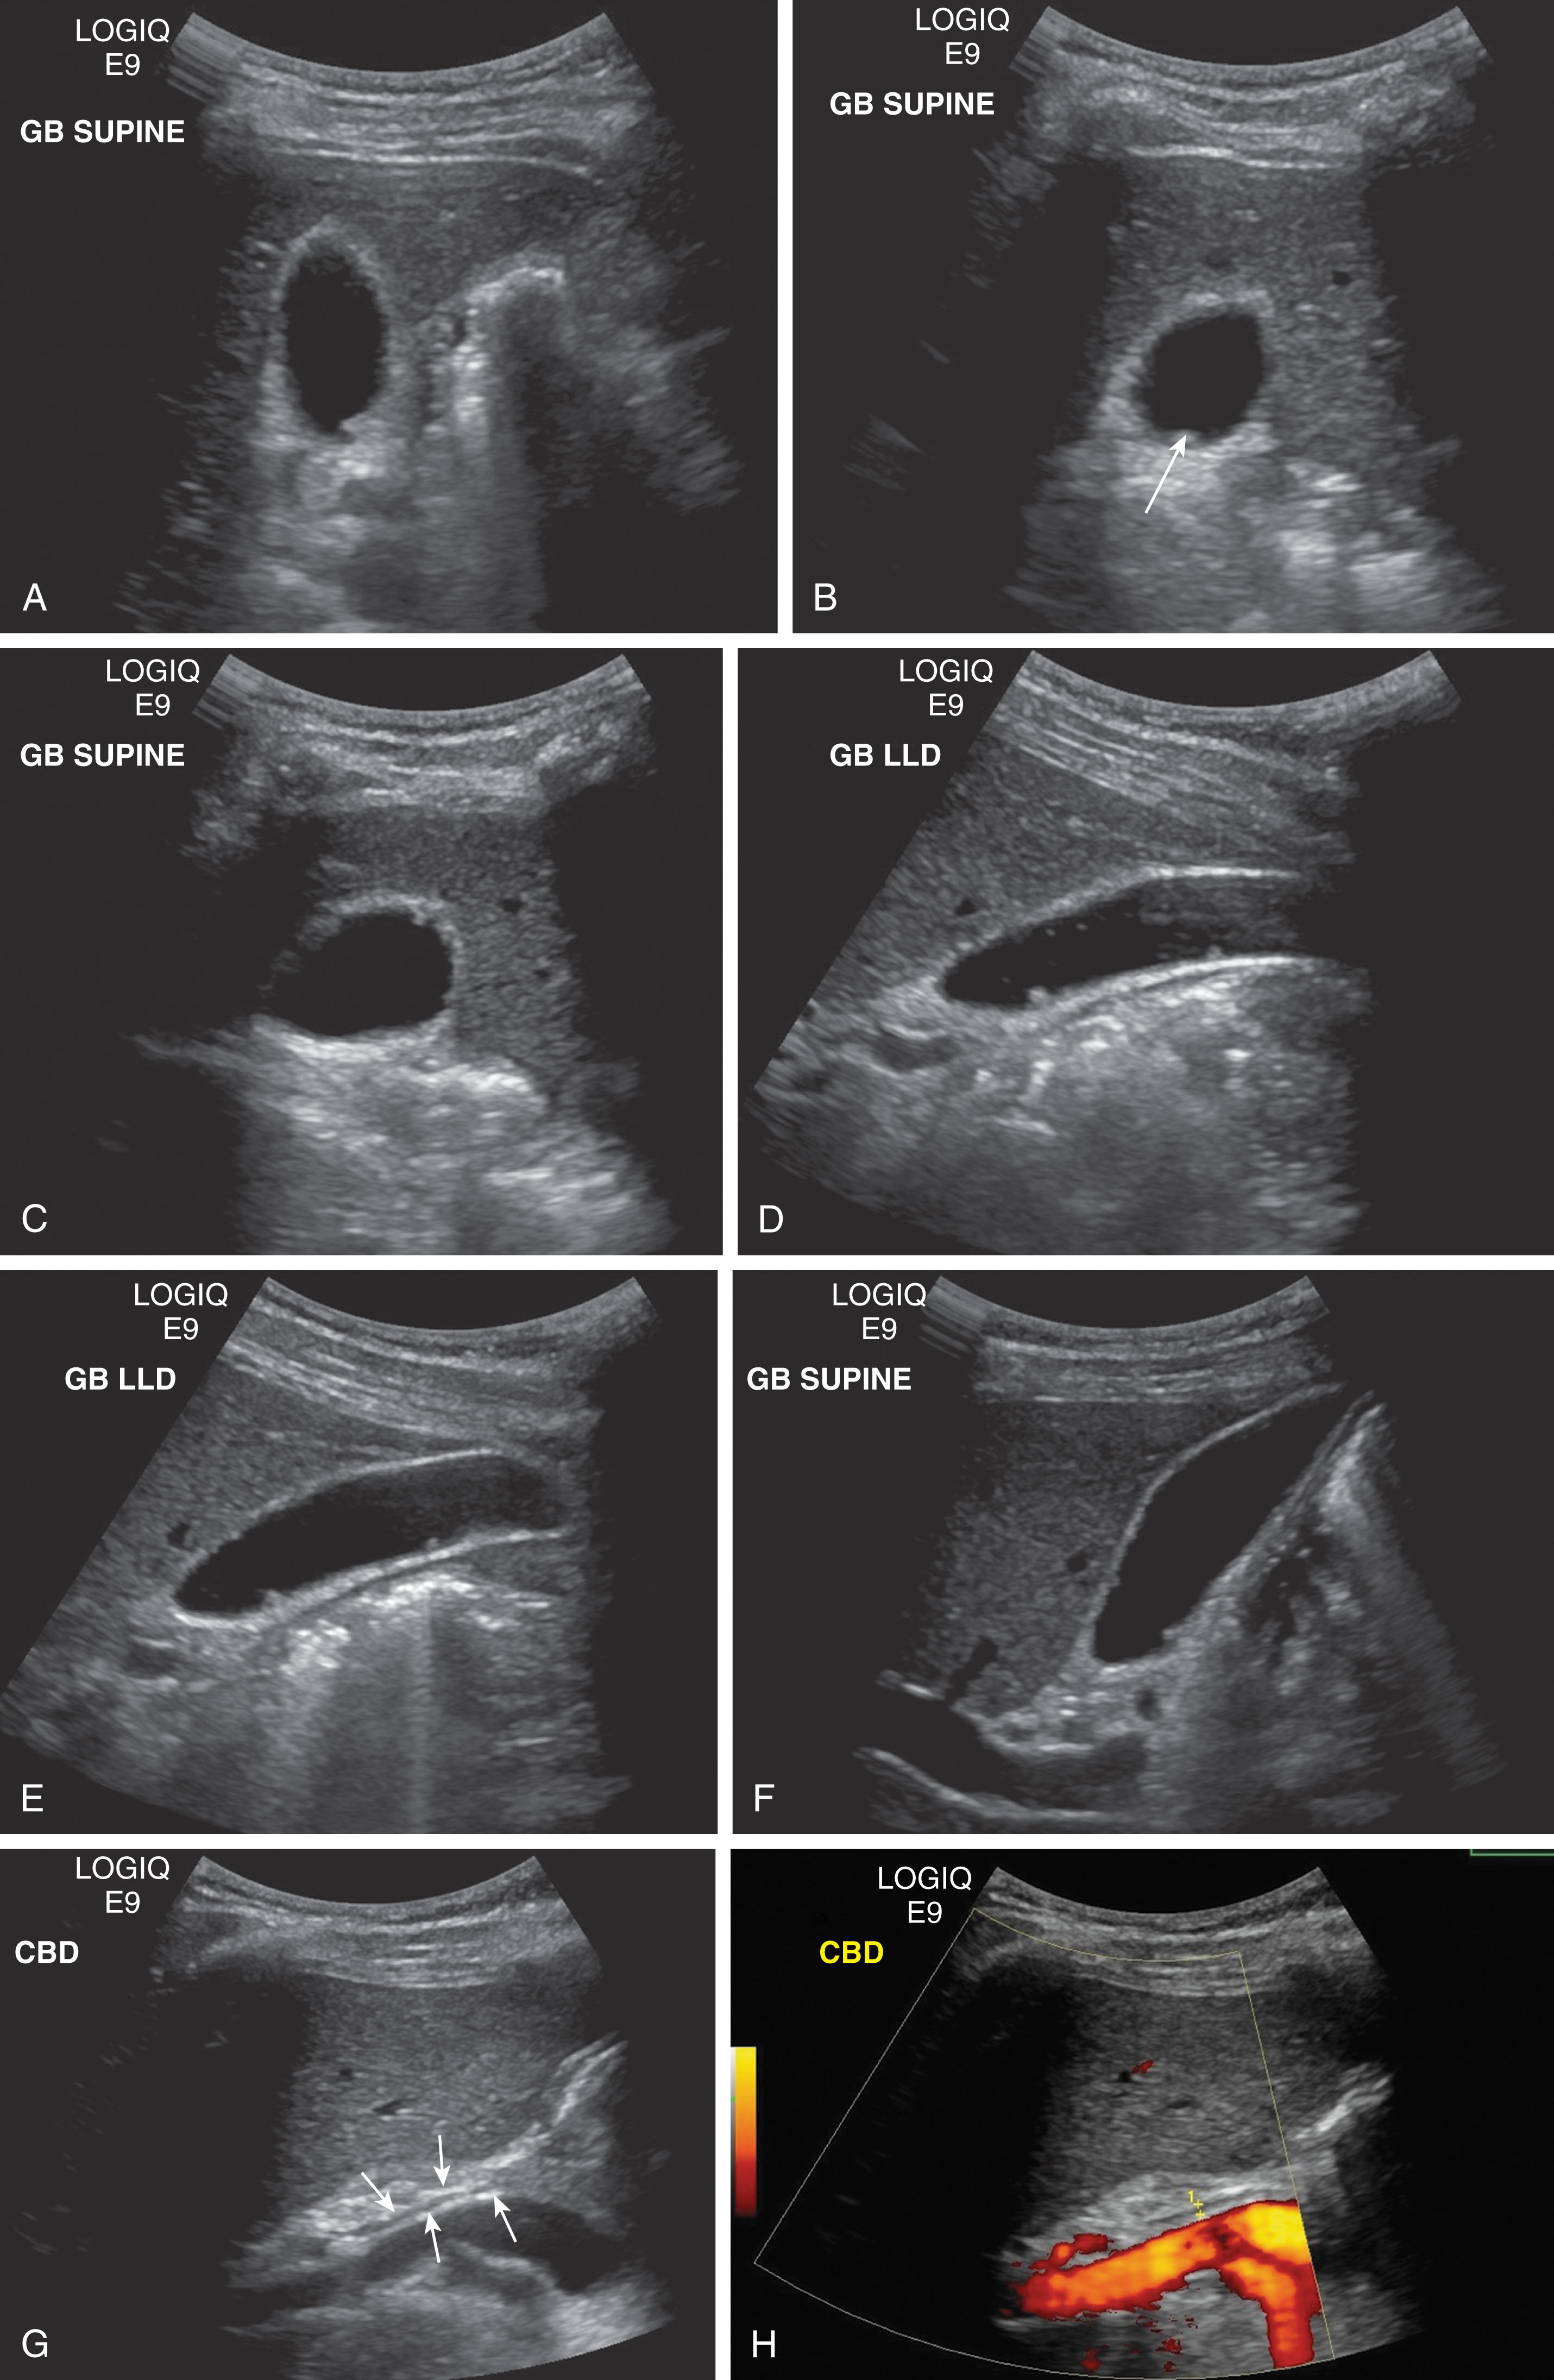 Fig. 10.10, (A–C) Supine transverse images of the gallbladder. Note the small echogenic adenoma attached to the posterior wall (arrow) . This does not move with alterations in patient position. (D–E) Left lateral decubitus images of the long axis of the gallbladder. (F–H) Supine longitudinal images of the gallbladder and common bile duct (arrows) .